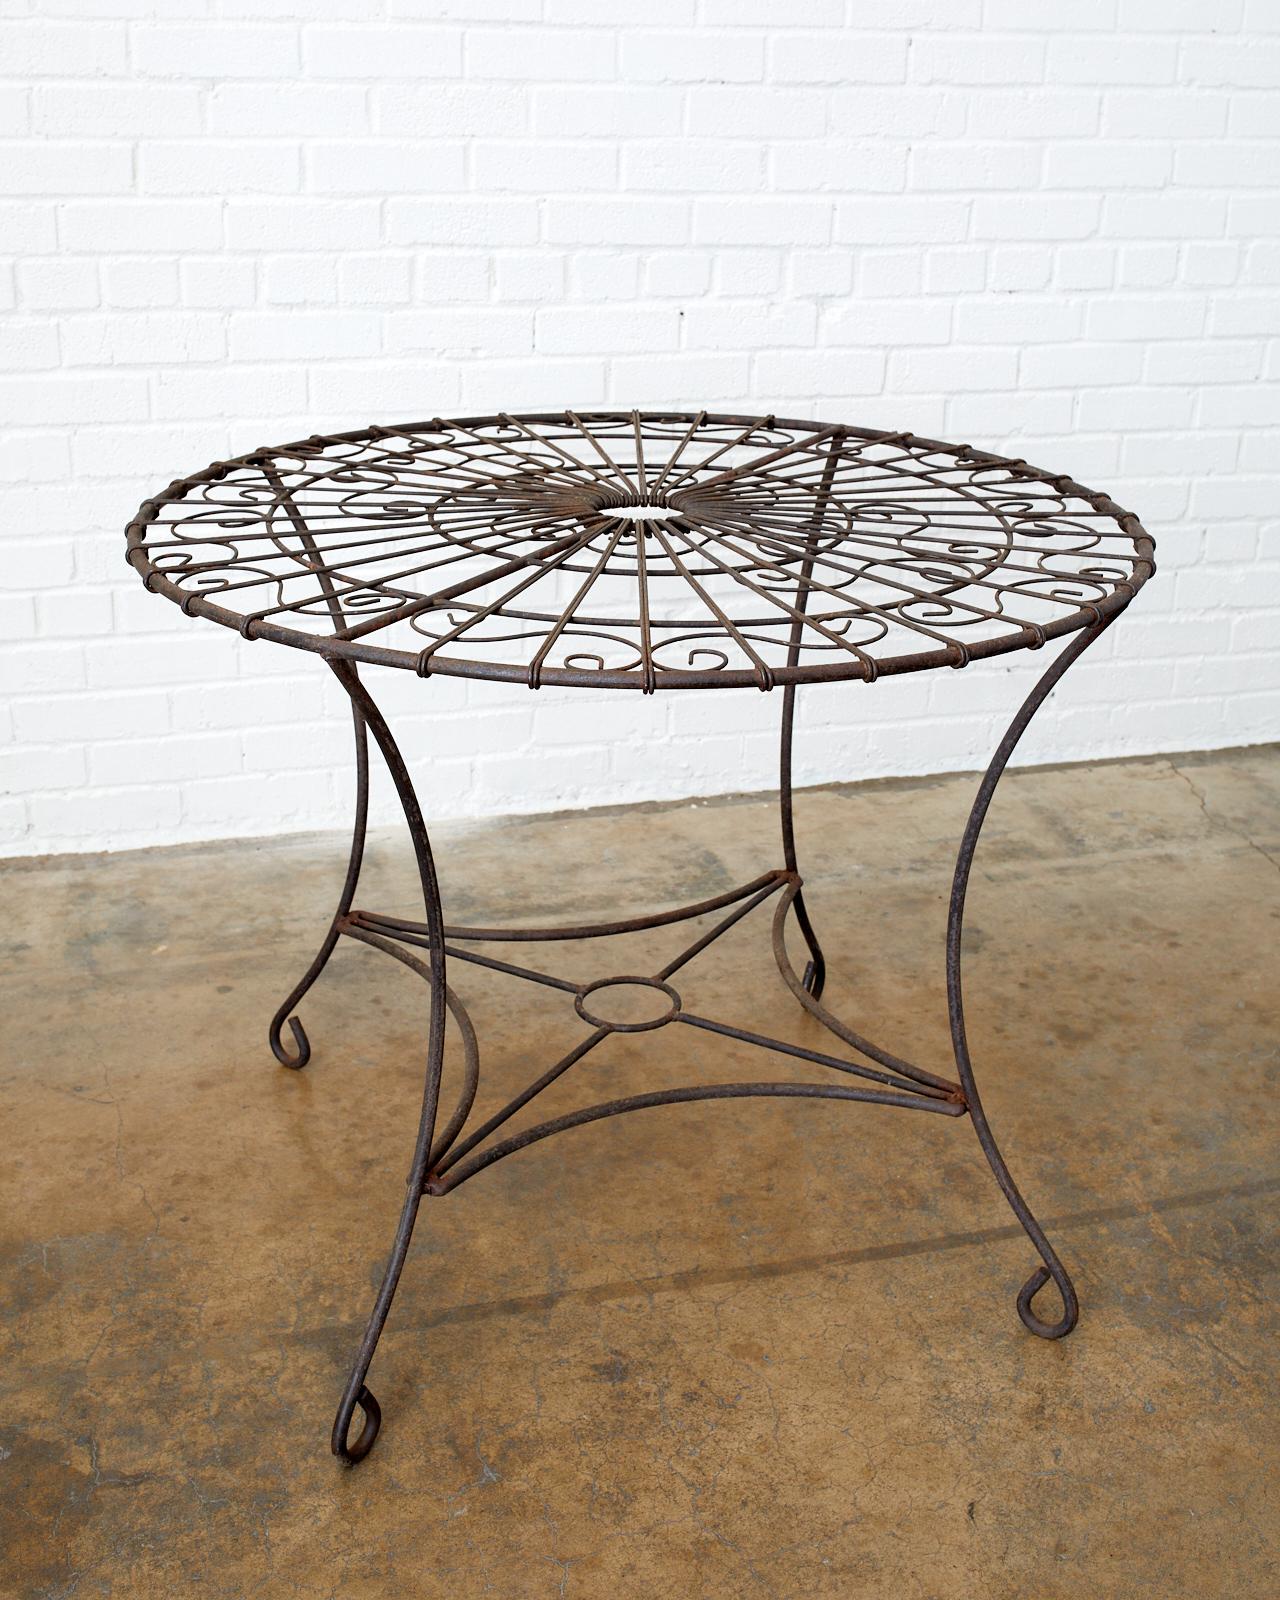 French Art Nouveau Iron and Wire Garden Table 1